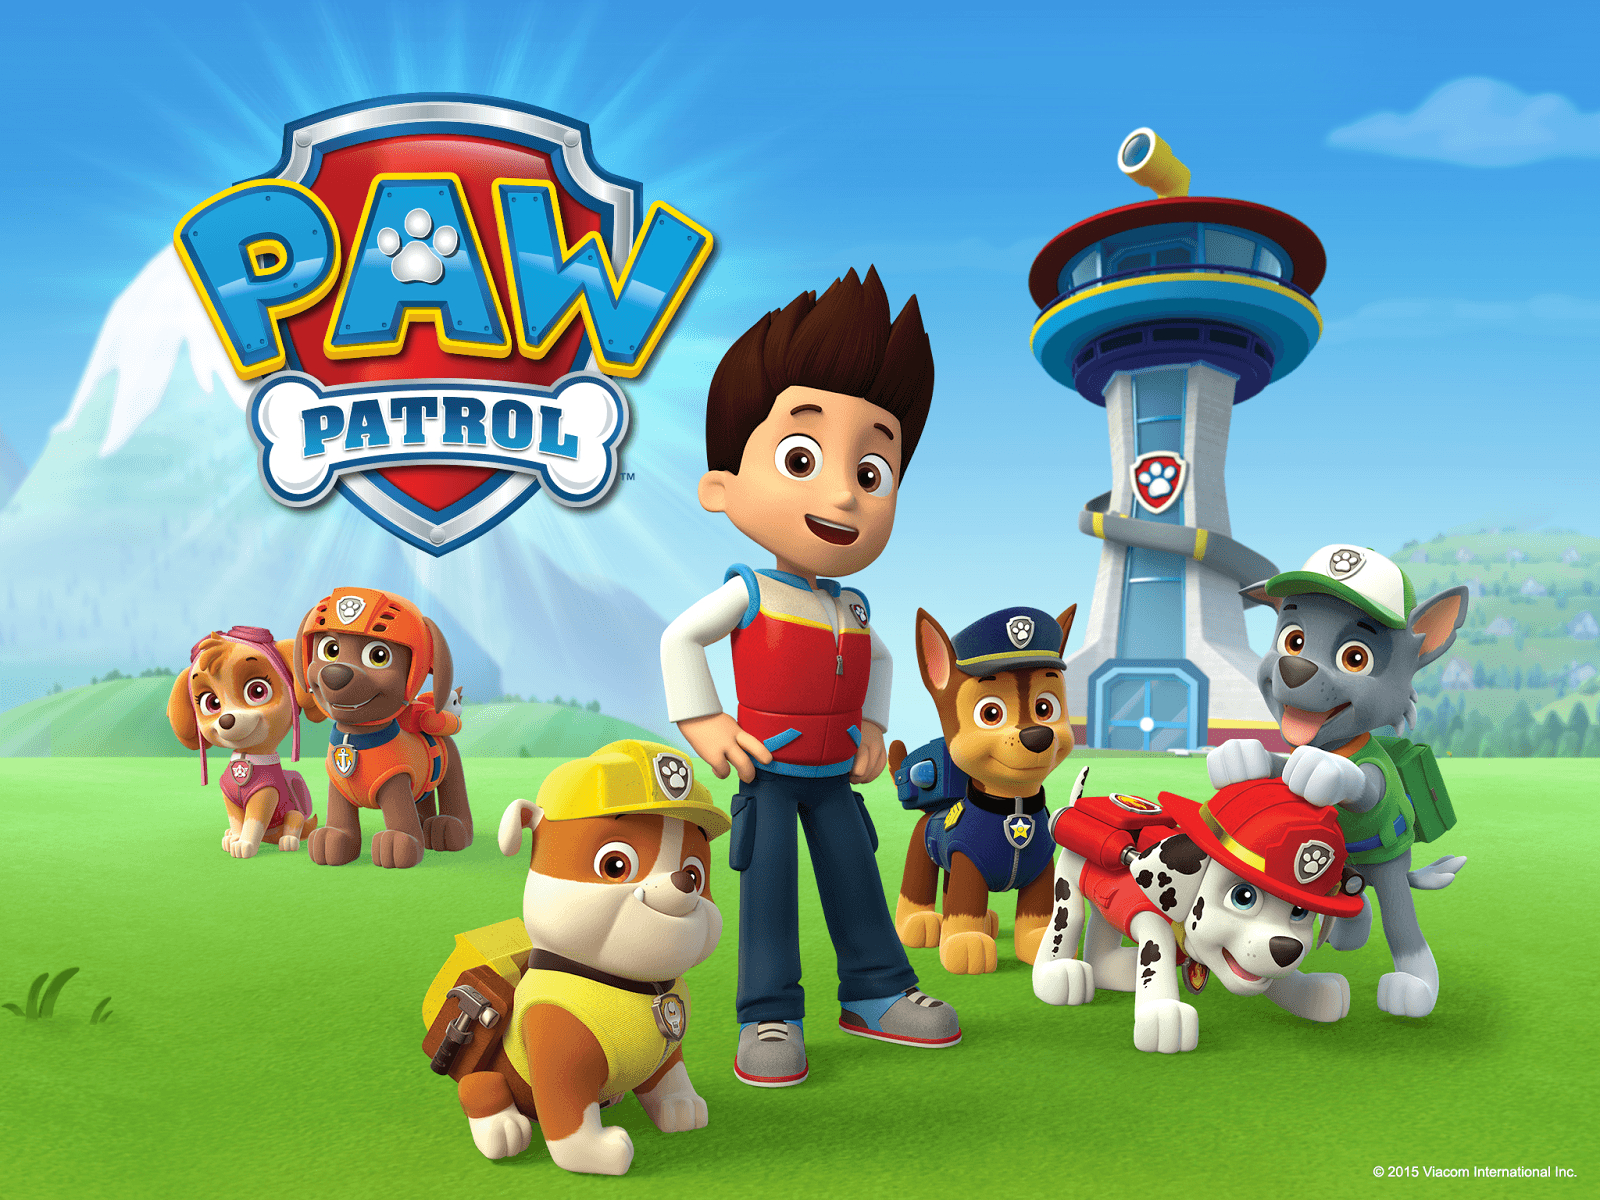 10 Latest Paw Patrol Wallpapers FULL HD 1080p For PC Background 2020